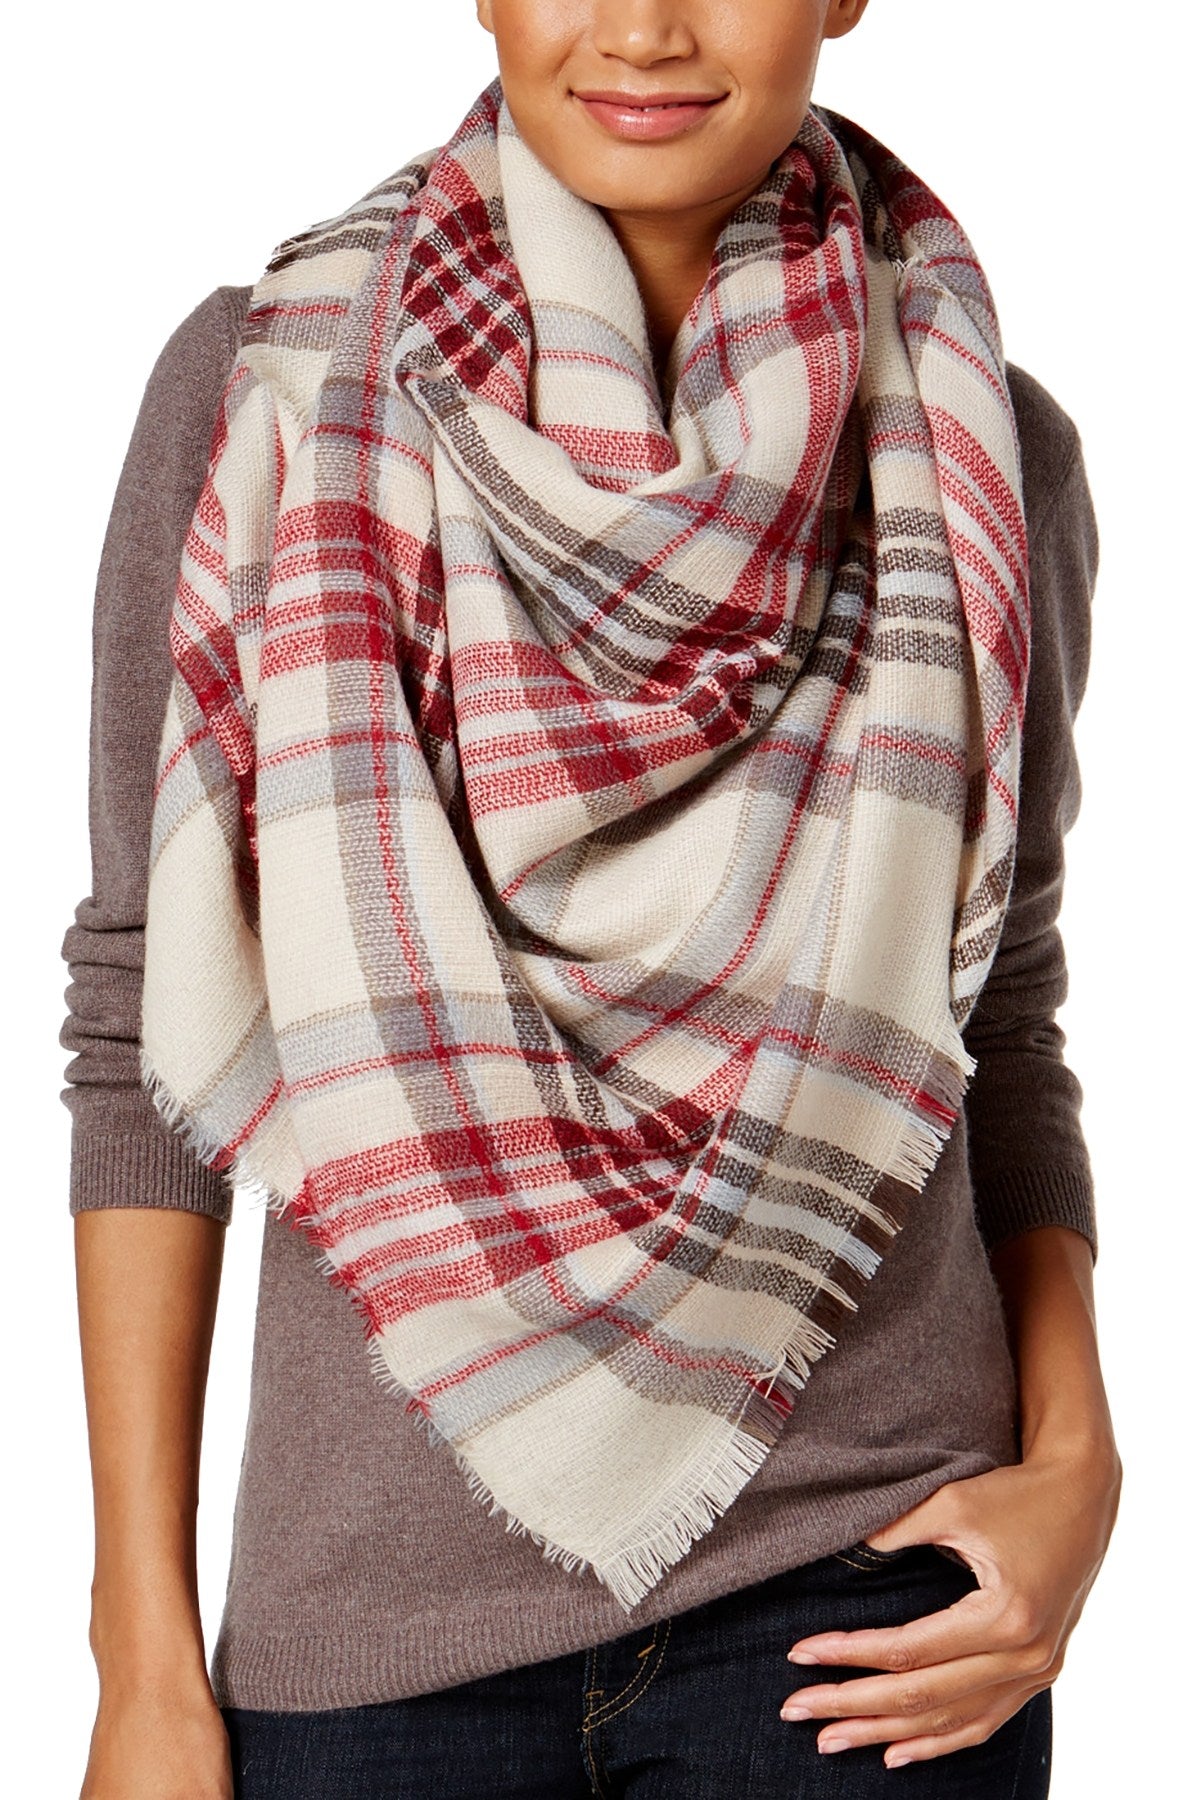 Steve Madden Red Classic-Plaid Square Blanket, Wrap / Scarf